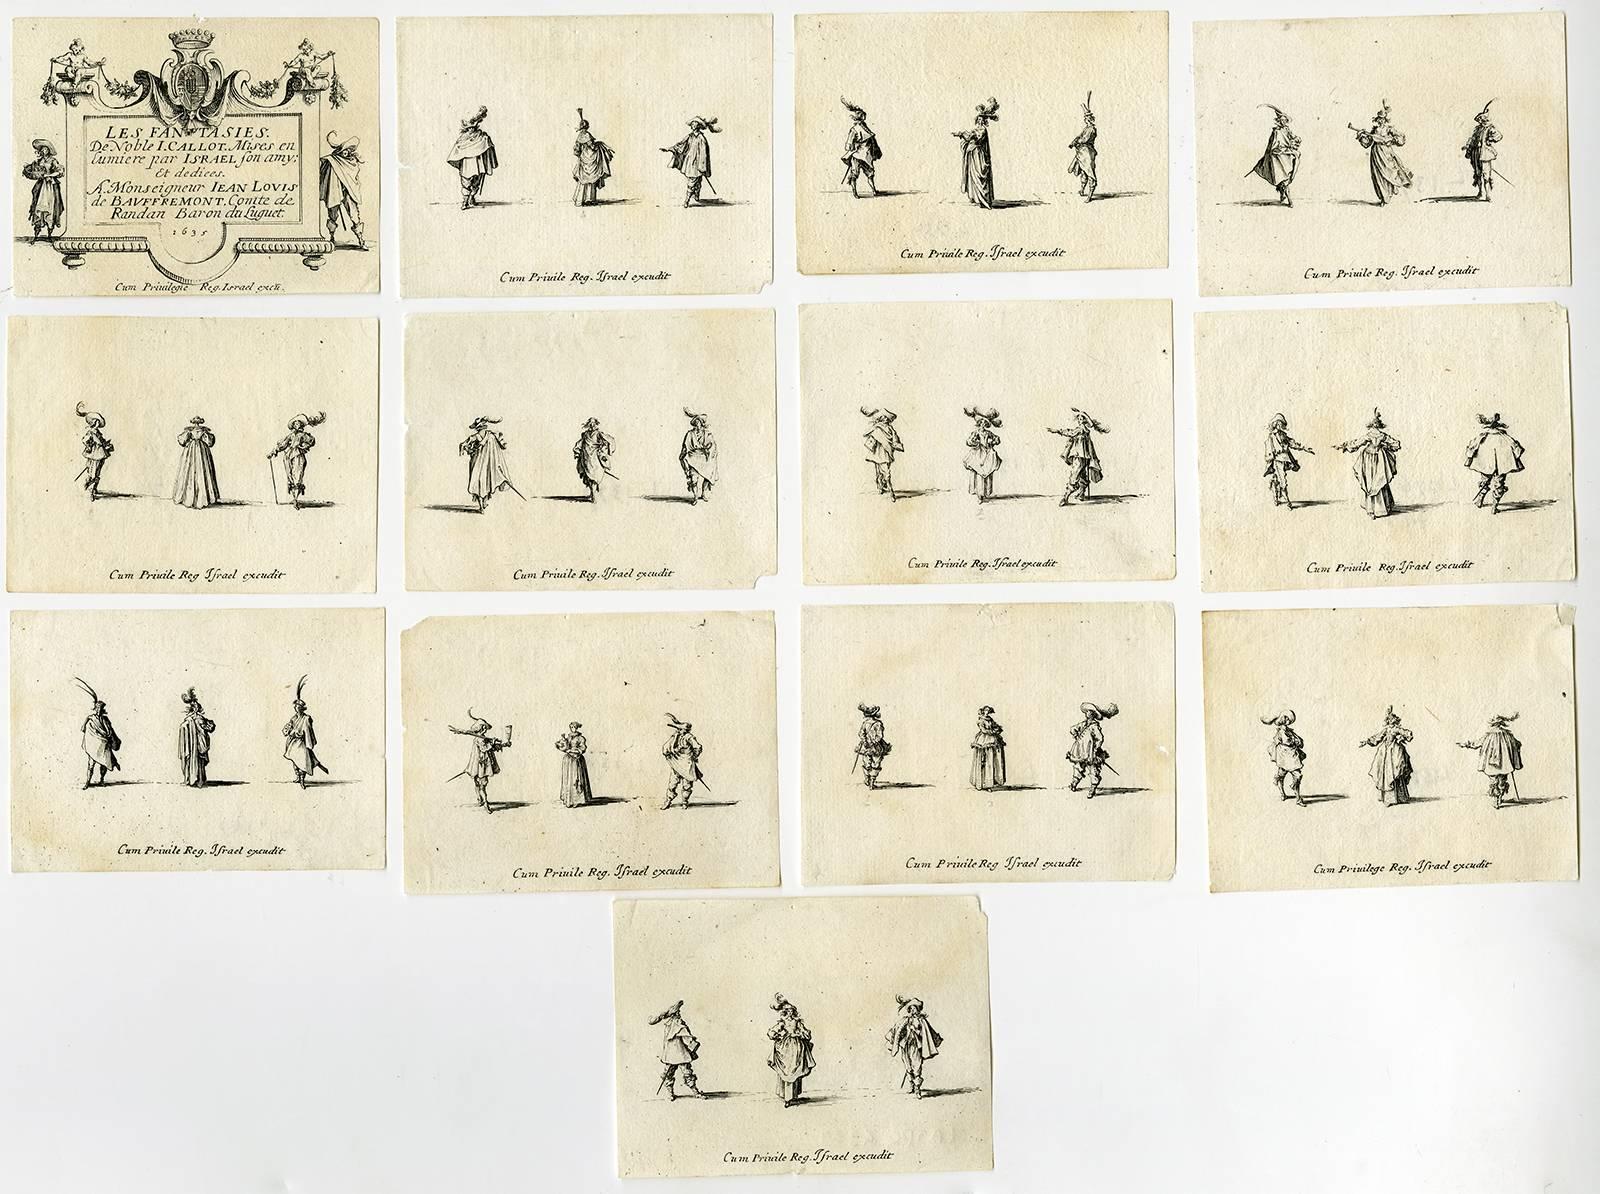 Jacques Callot Figurative Print - Les Fantaisies.' - Complete series of small figures.